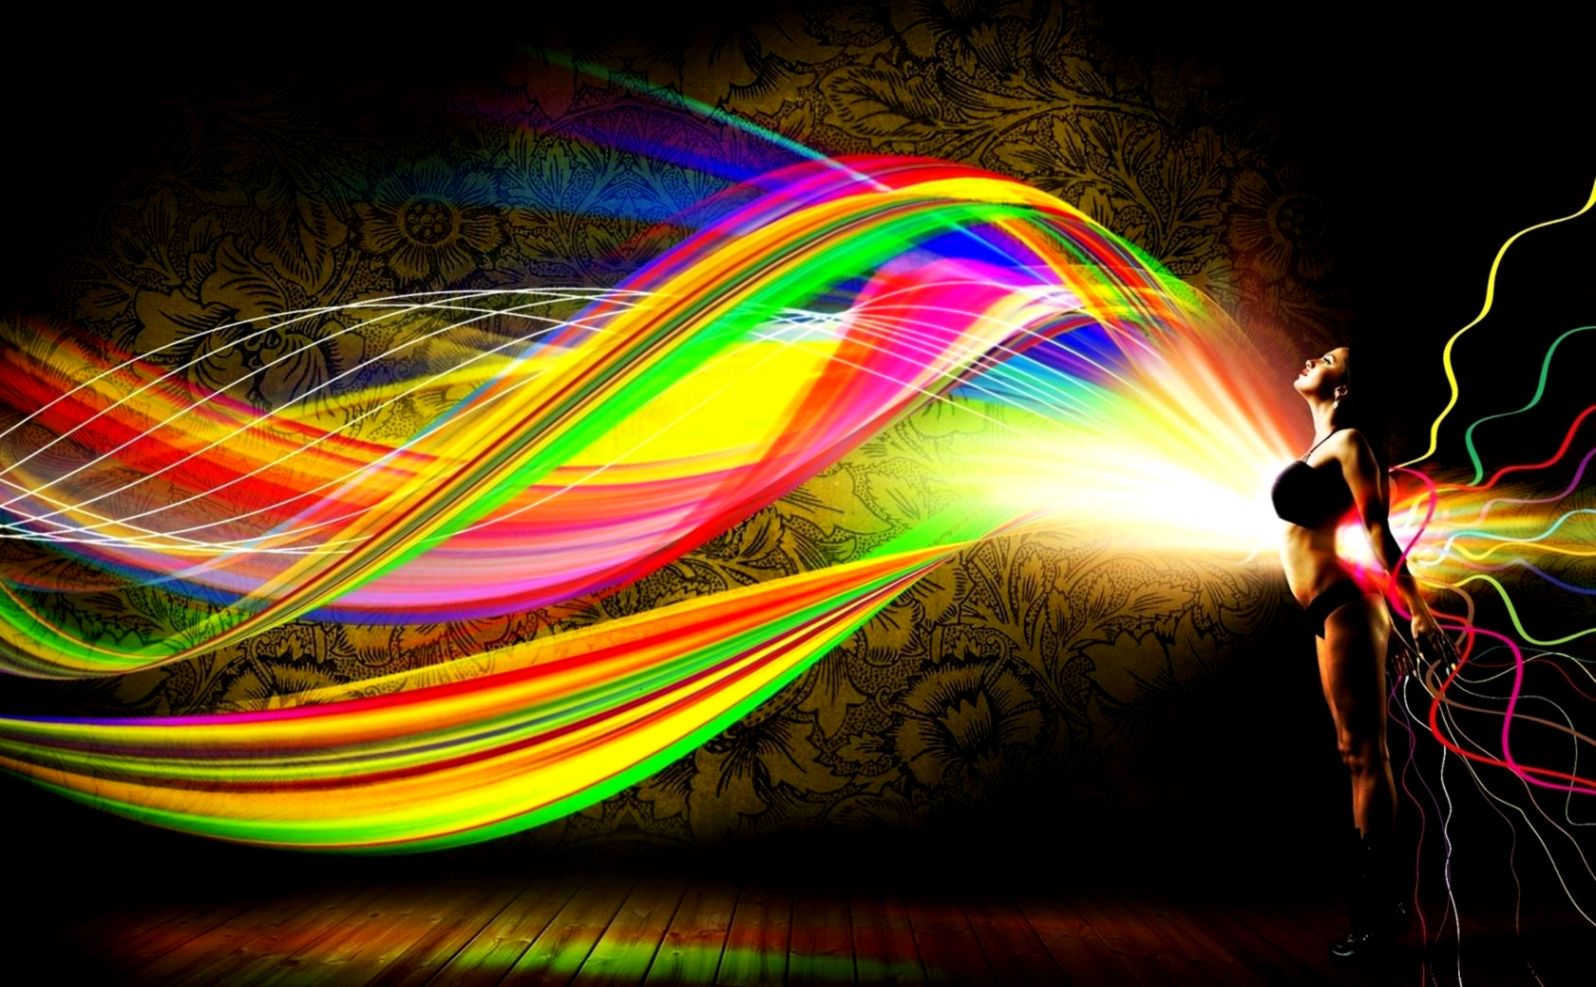 HD Wallpaper Abstract Bright Gallery